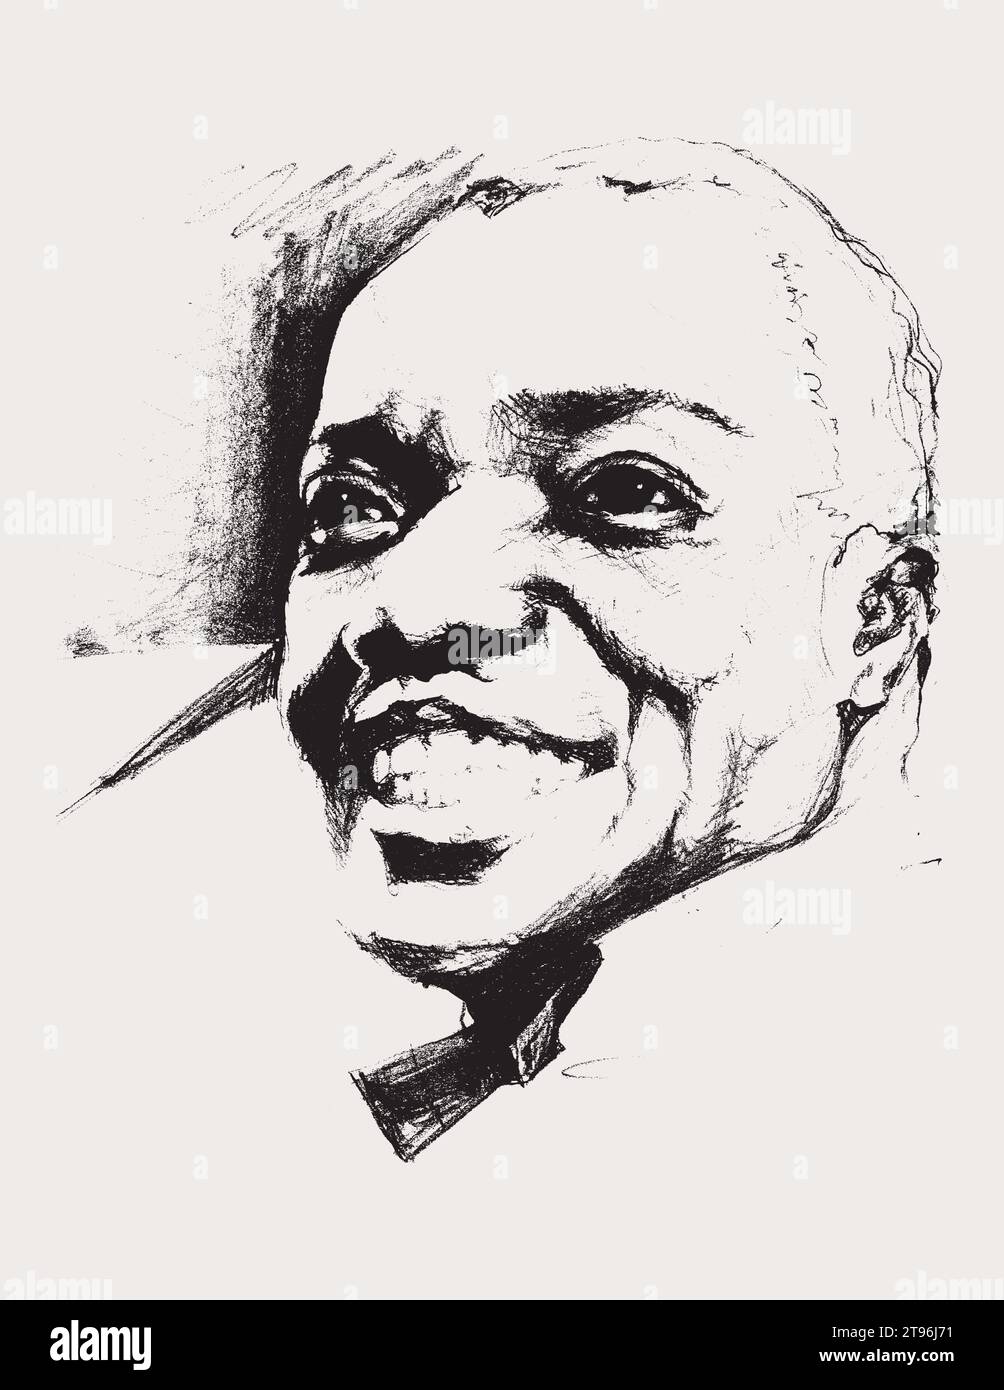 Vector free hand drawing illustration of Louis Armstrong, the legendary American jazz trompeter and vocalist. Stock Vector